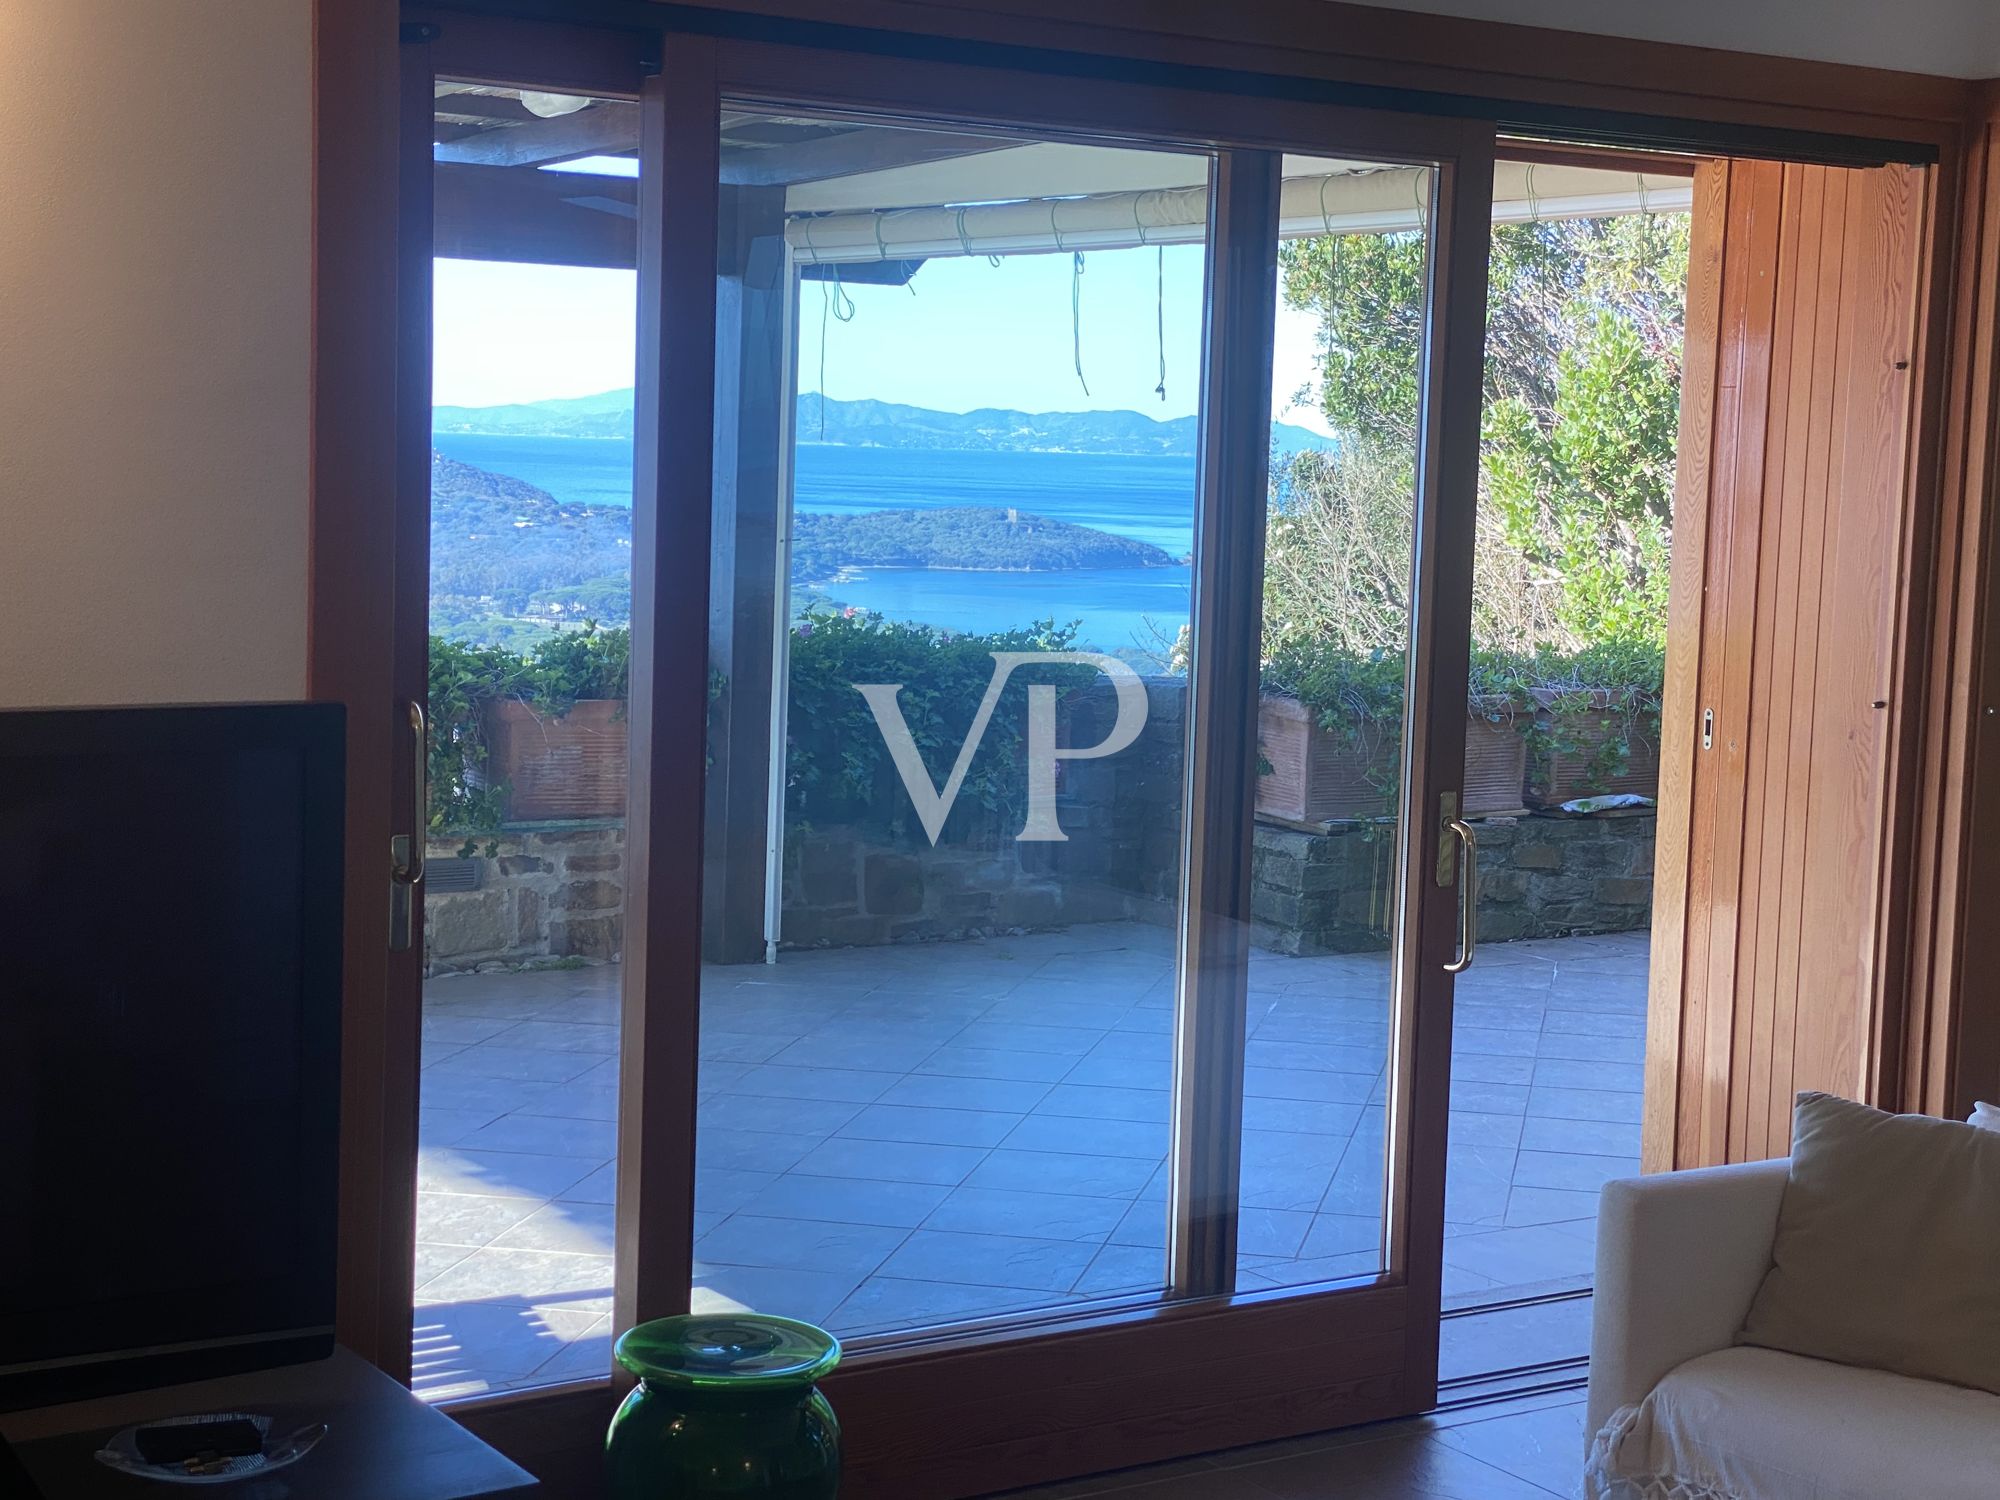 Exclusive villa with breathtaking 180° panoramic views in Punta Ala